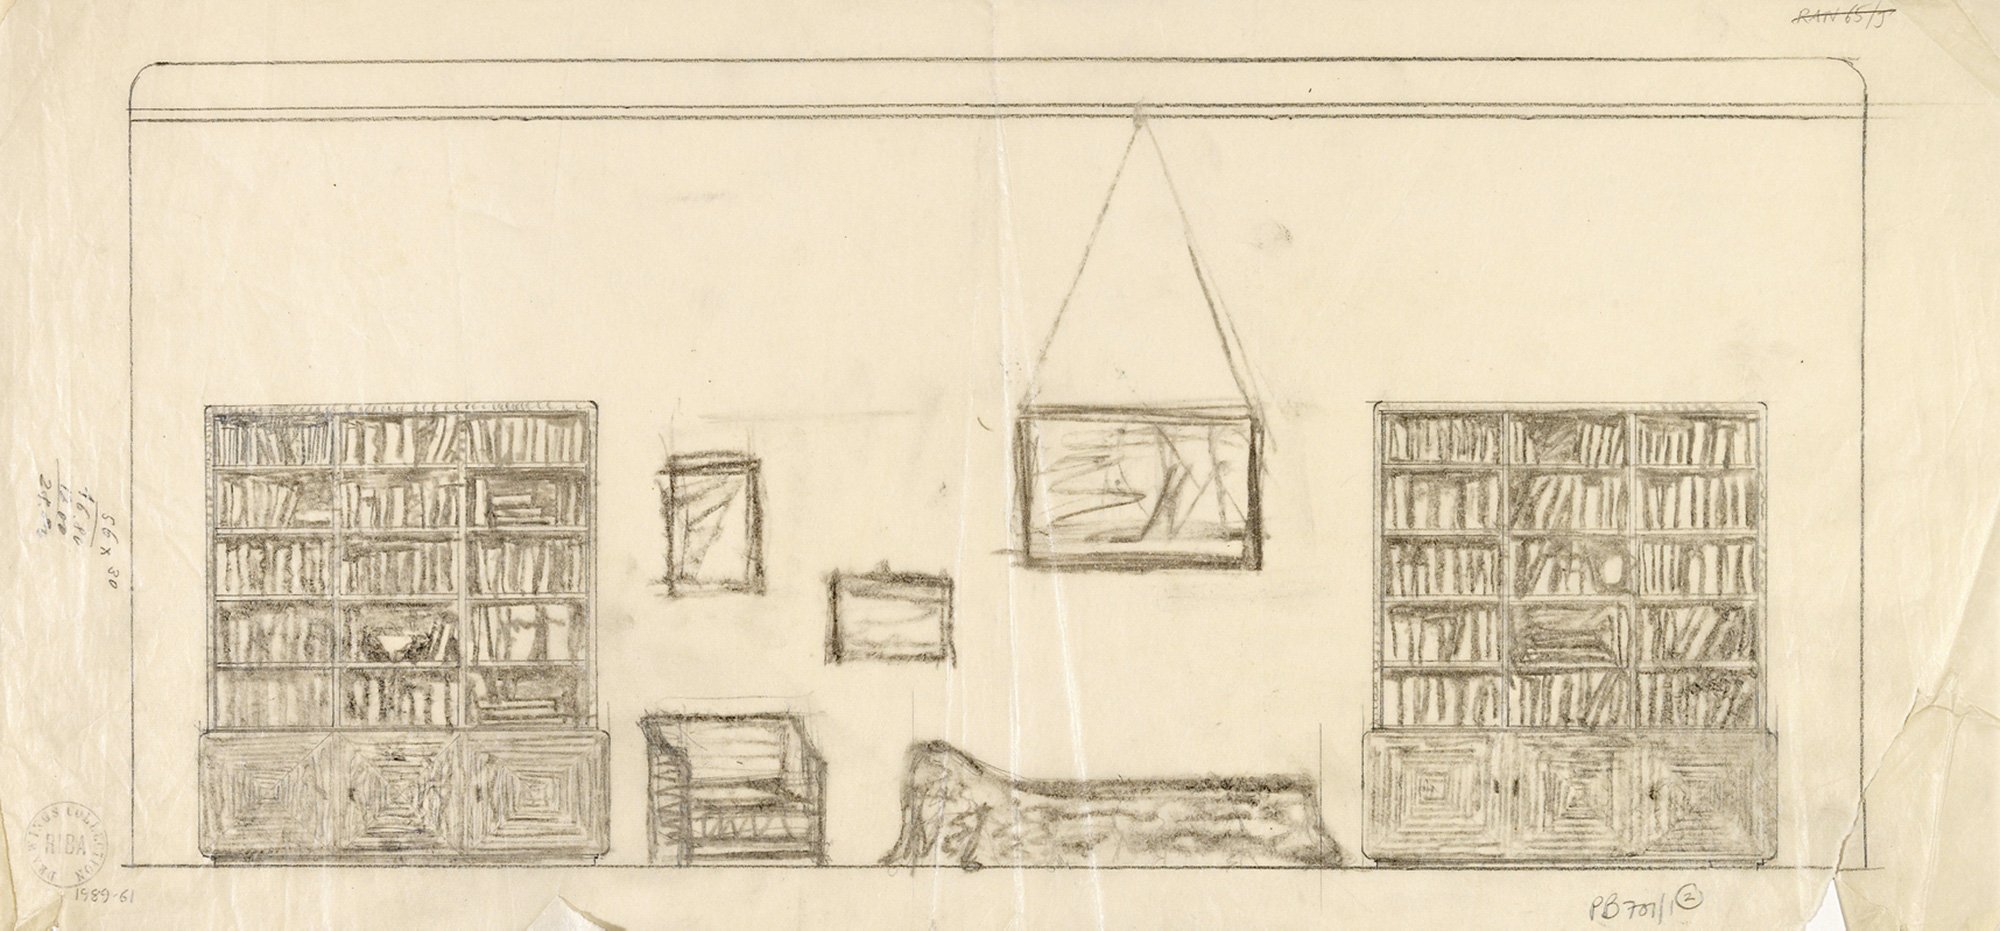 Undated sketch by Freud for consulting room with couch set between bookshelves, possibly for his father’s home in London.